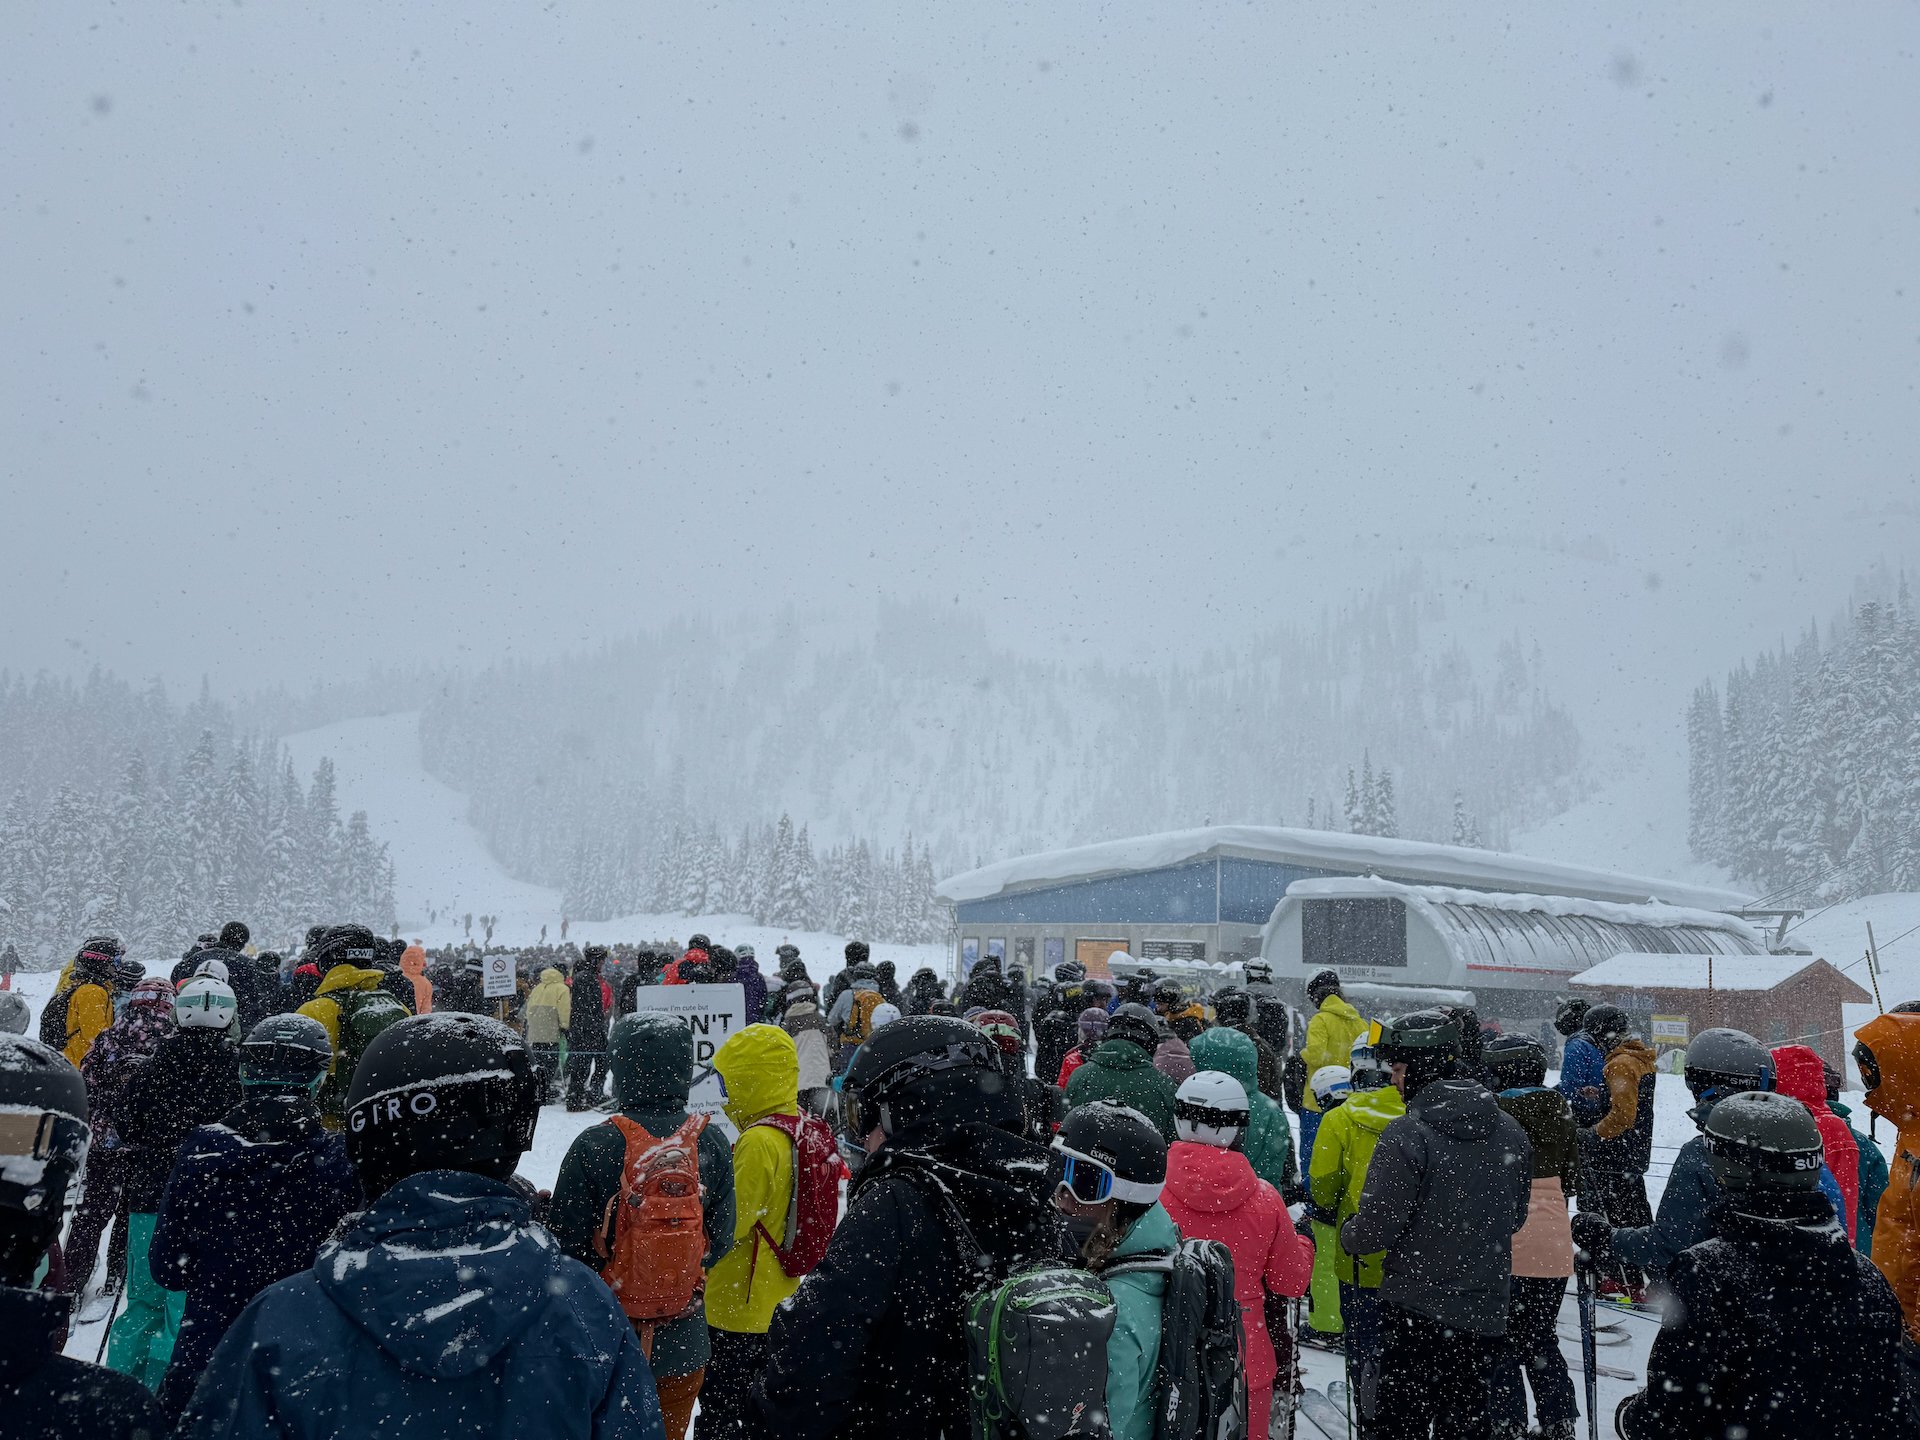  And as expected, the lift lines were kind of insane. 